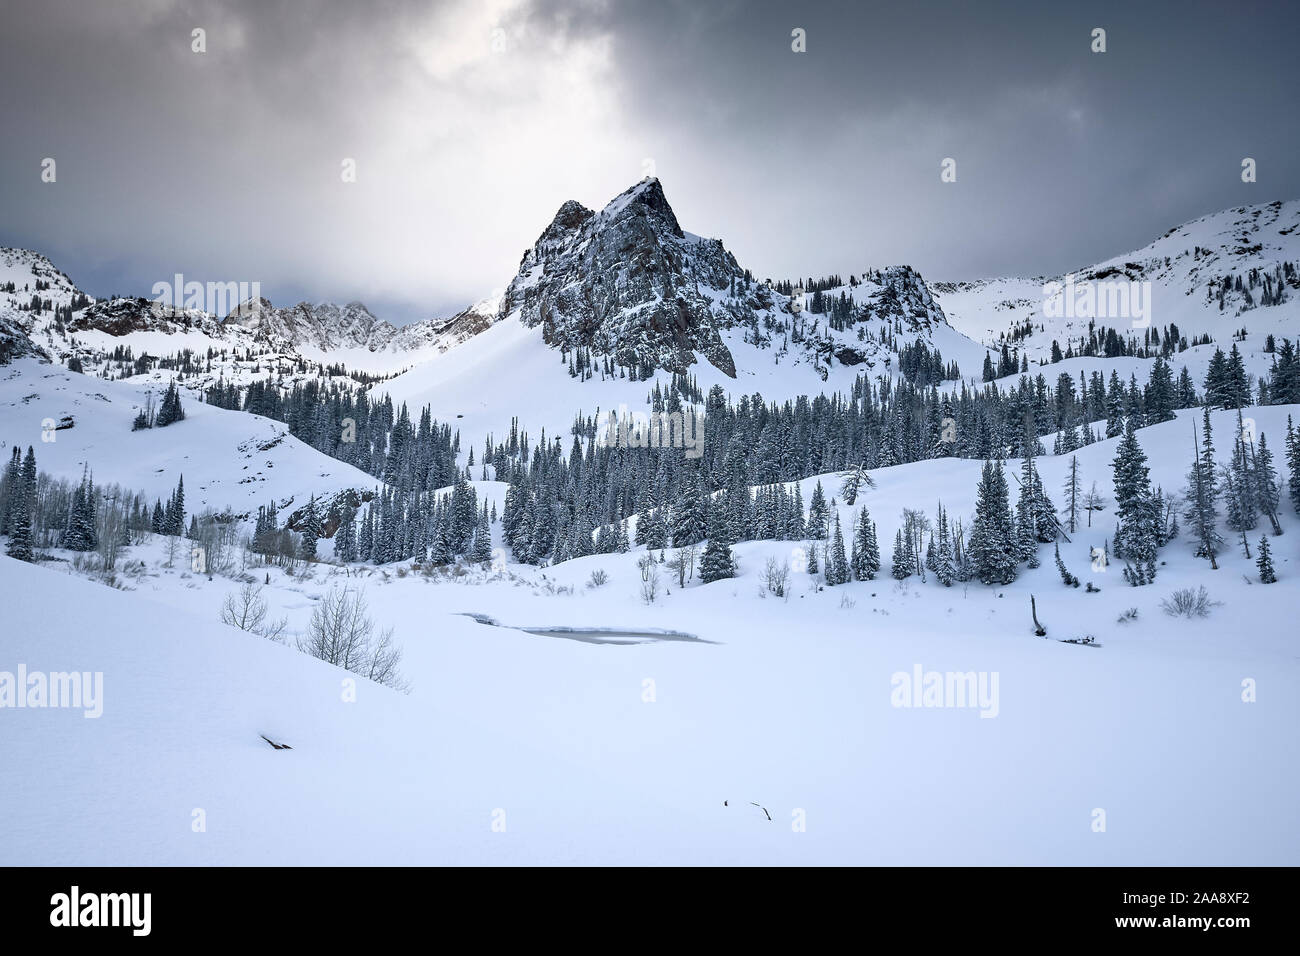 Sundial Peak and Lake Blanche in in the Wasatch Mountains, Utah, USA Stock Photo